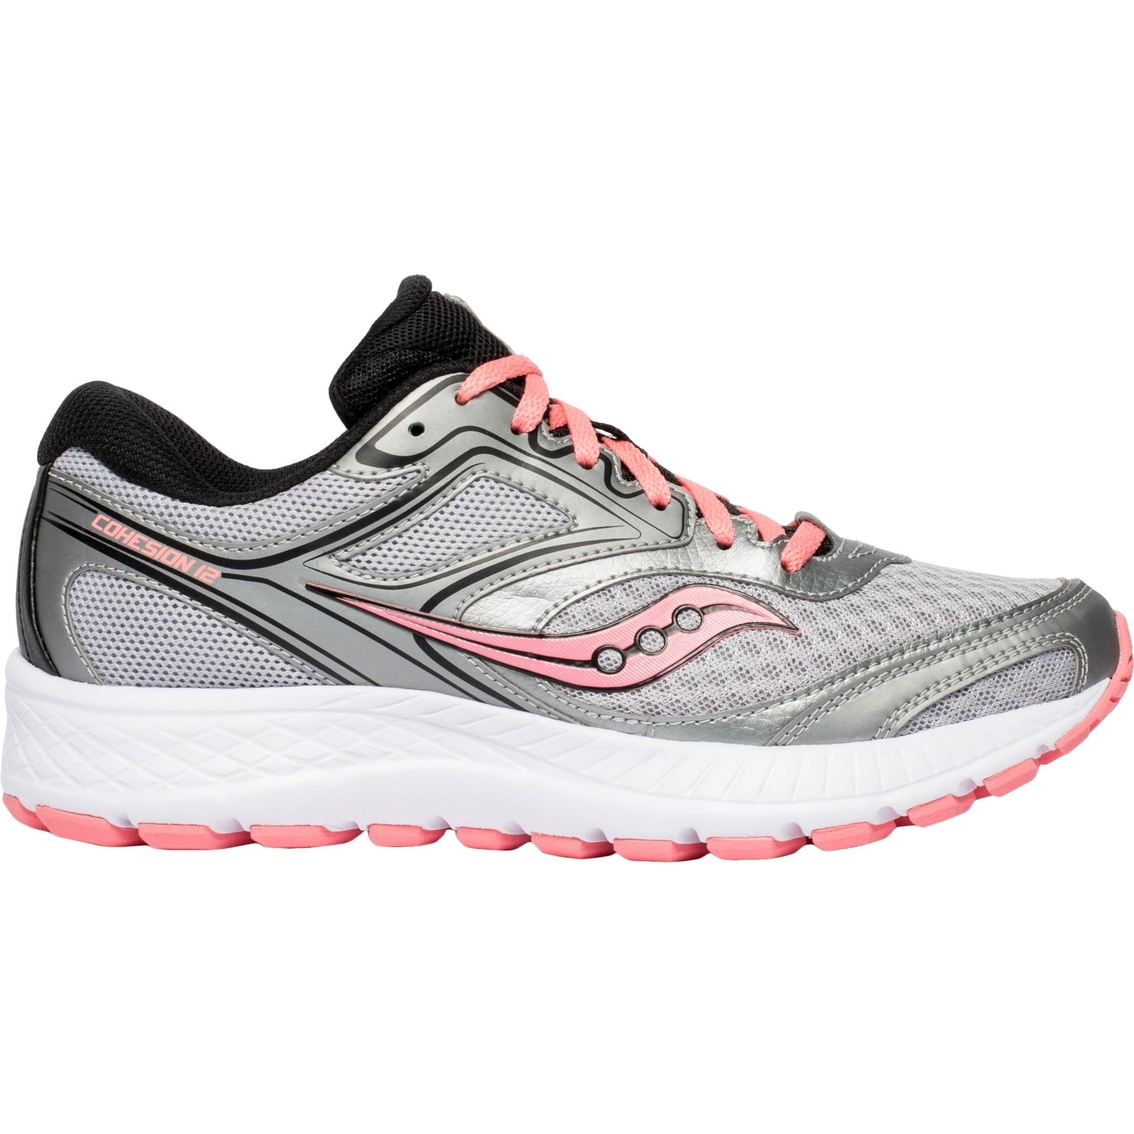 Saucony Women's Cohesion 12 Running Shoes - Image 2 of 4